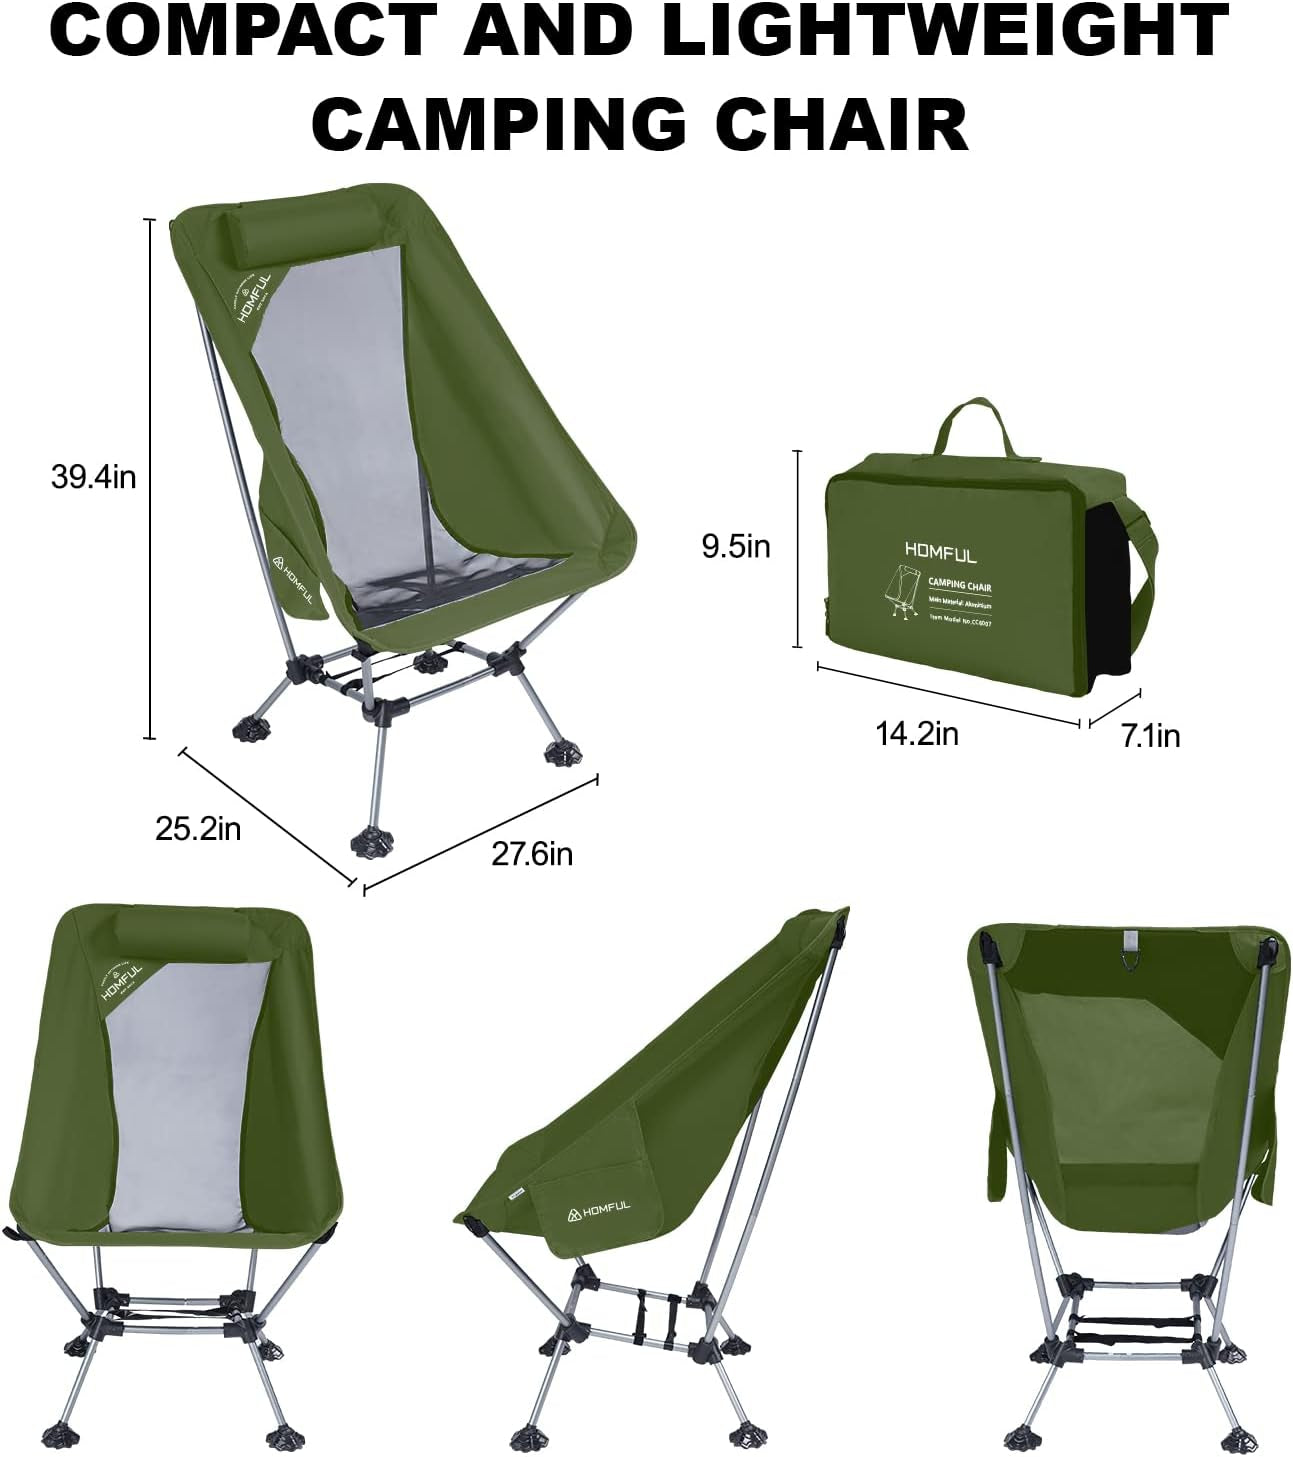 ultracamp™ Camping chair with Comfortable Headrest and easy storage